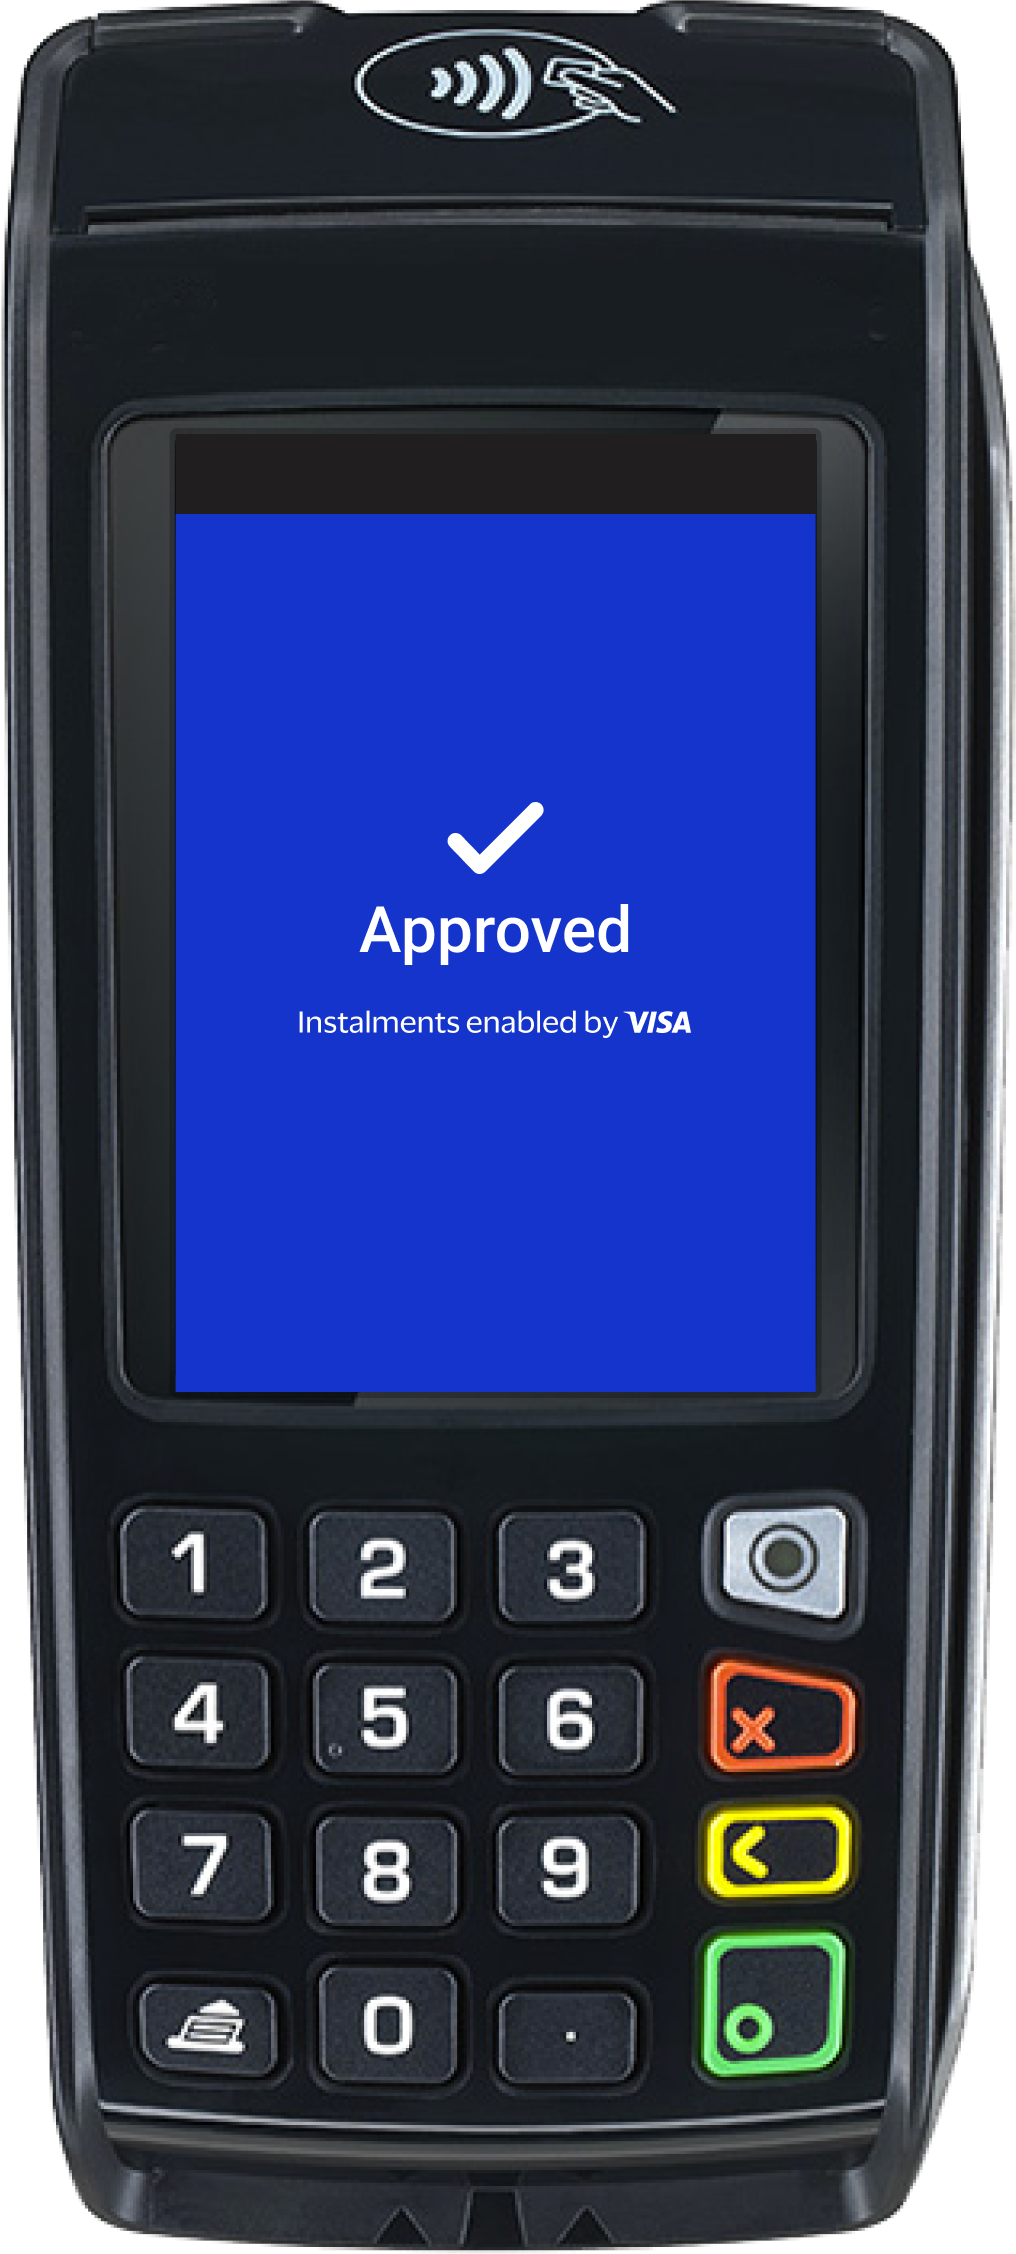 United Kingdom portrait 2 style payment terminal, transaction approved 